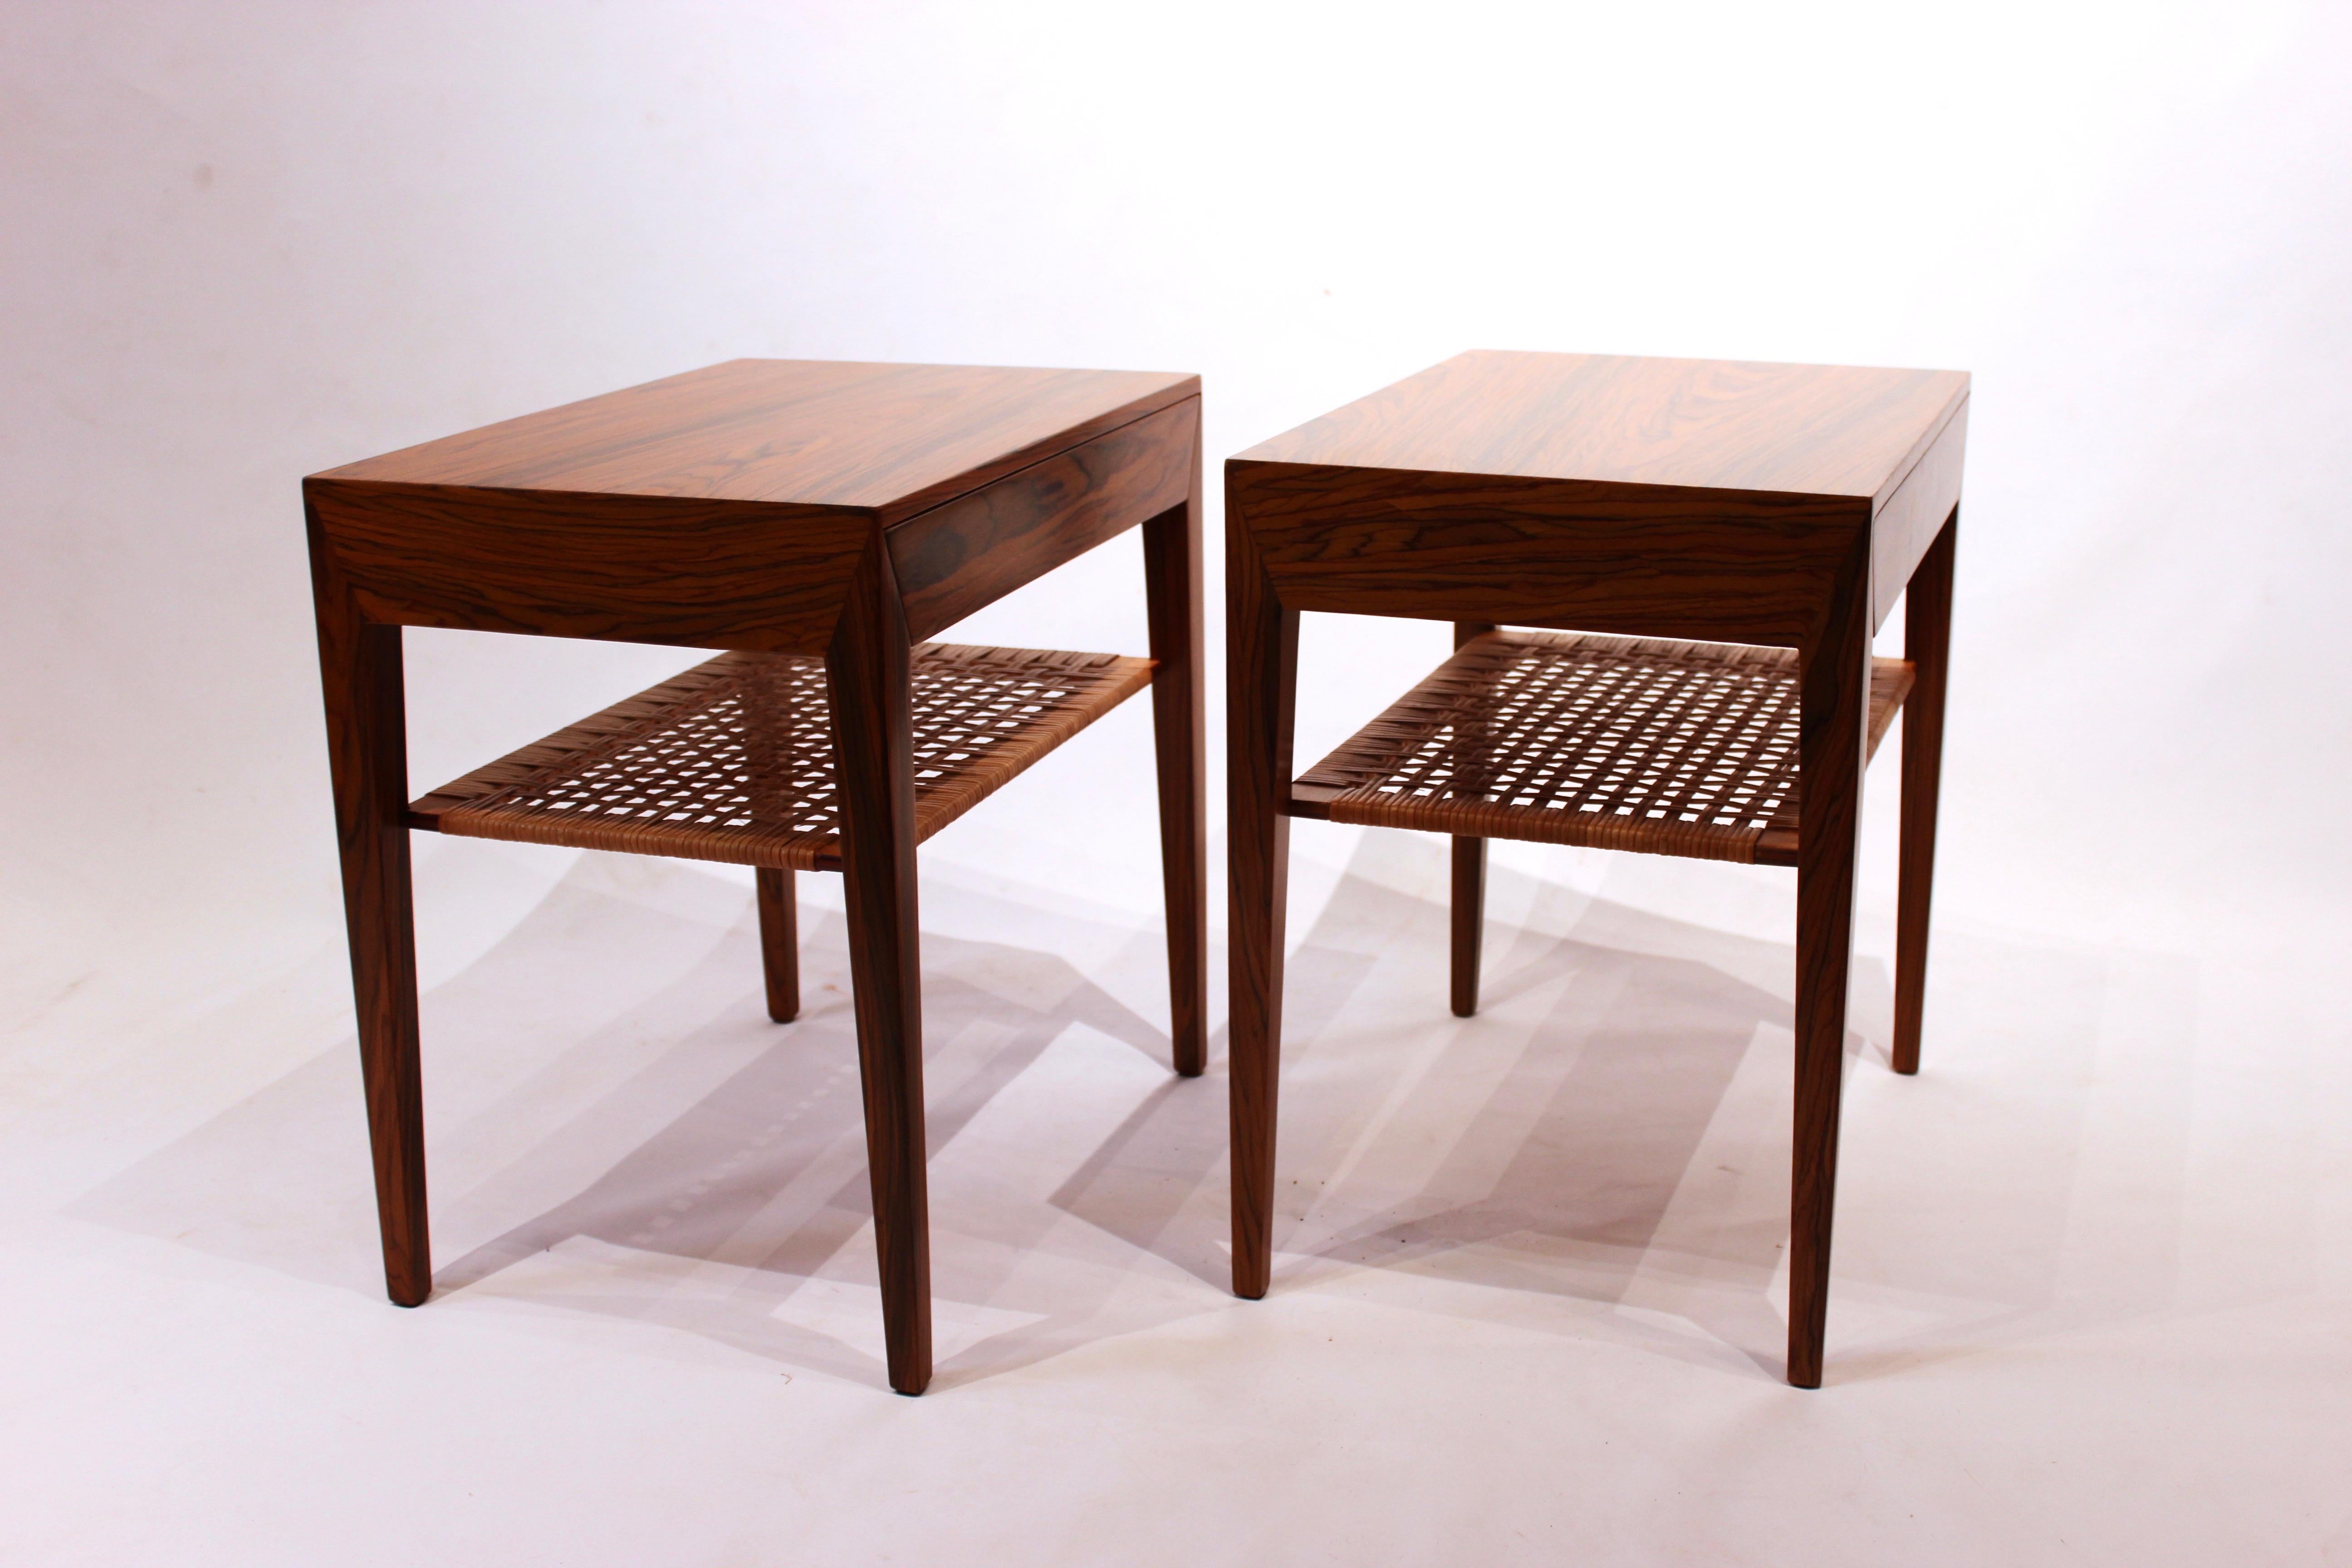 A set of bedside tables in rosewood and papercord shelf designed by Severin Hansen and manufactured by Haslev furniture factory in the 1960s. The tables are in great vintage condition.